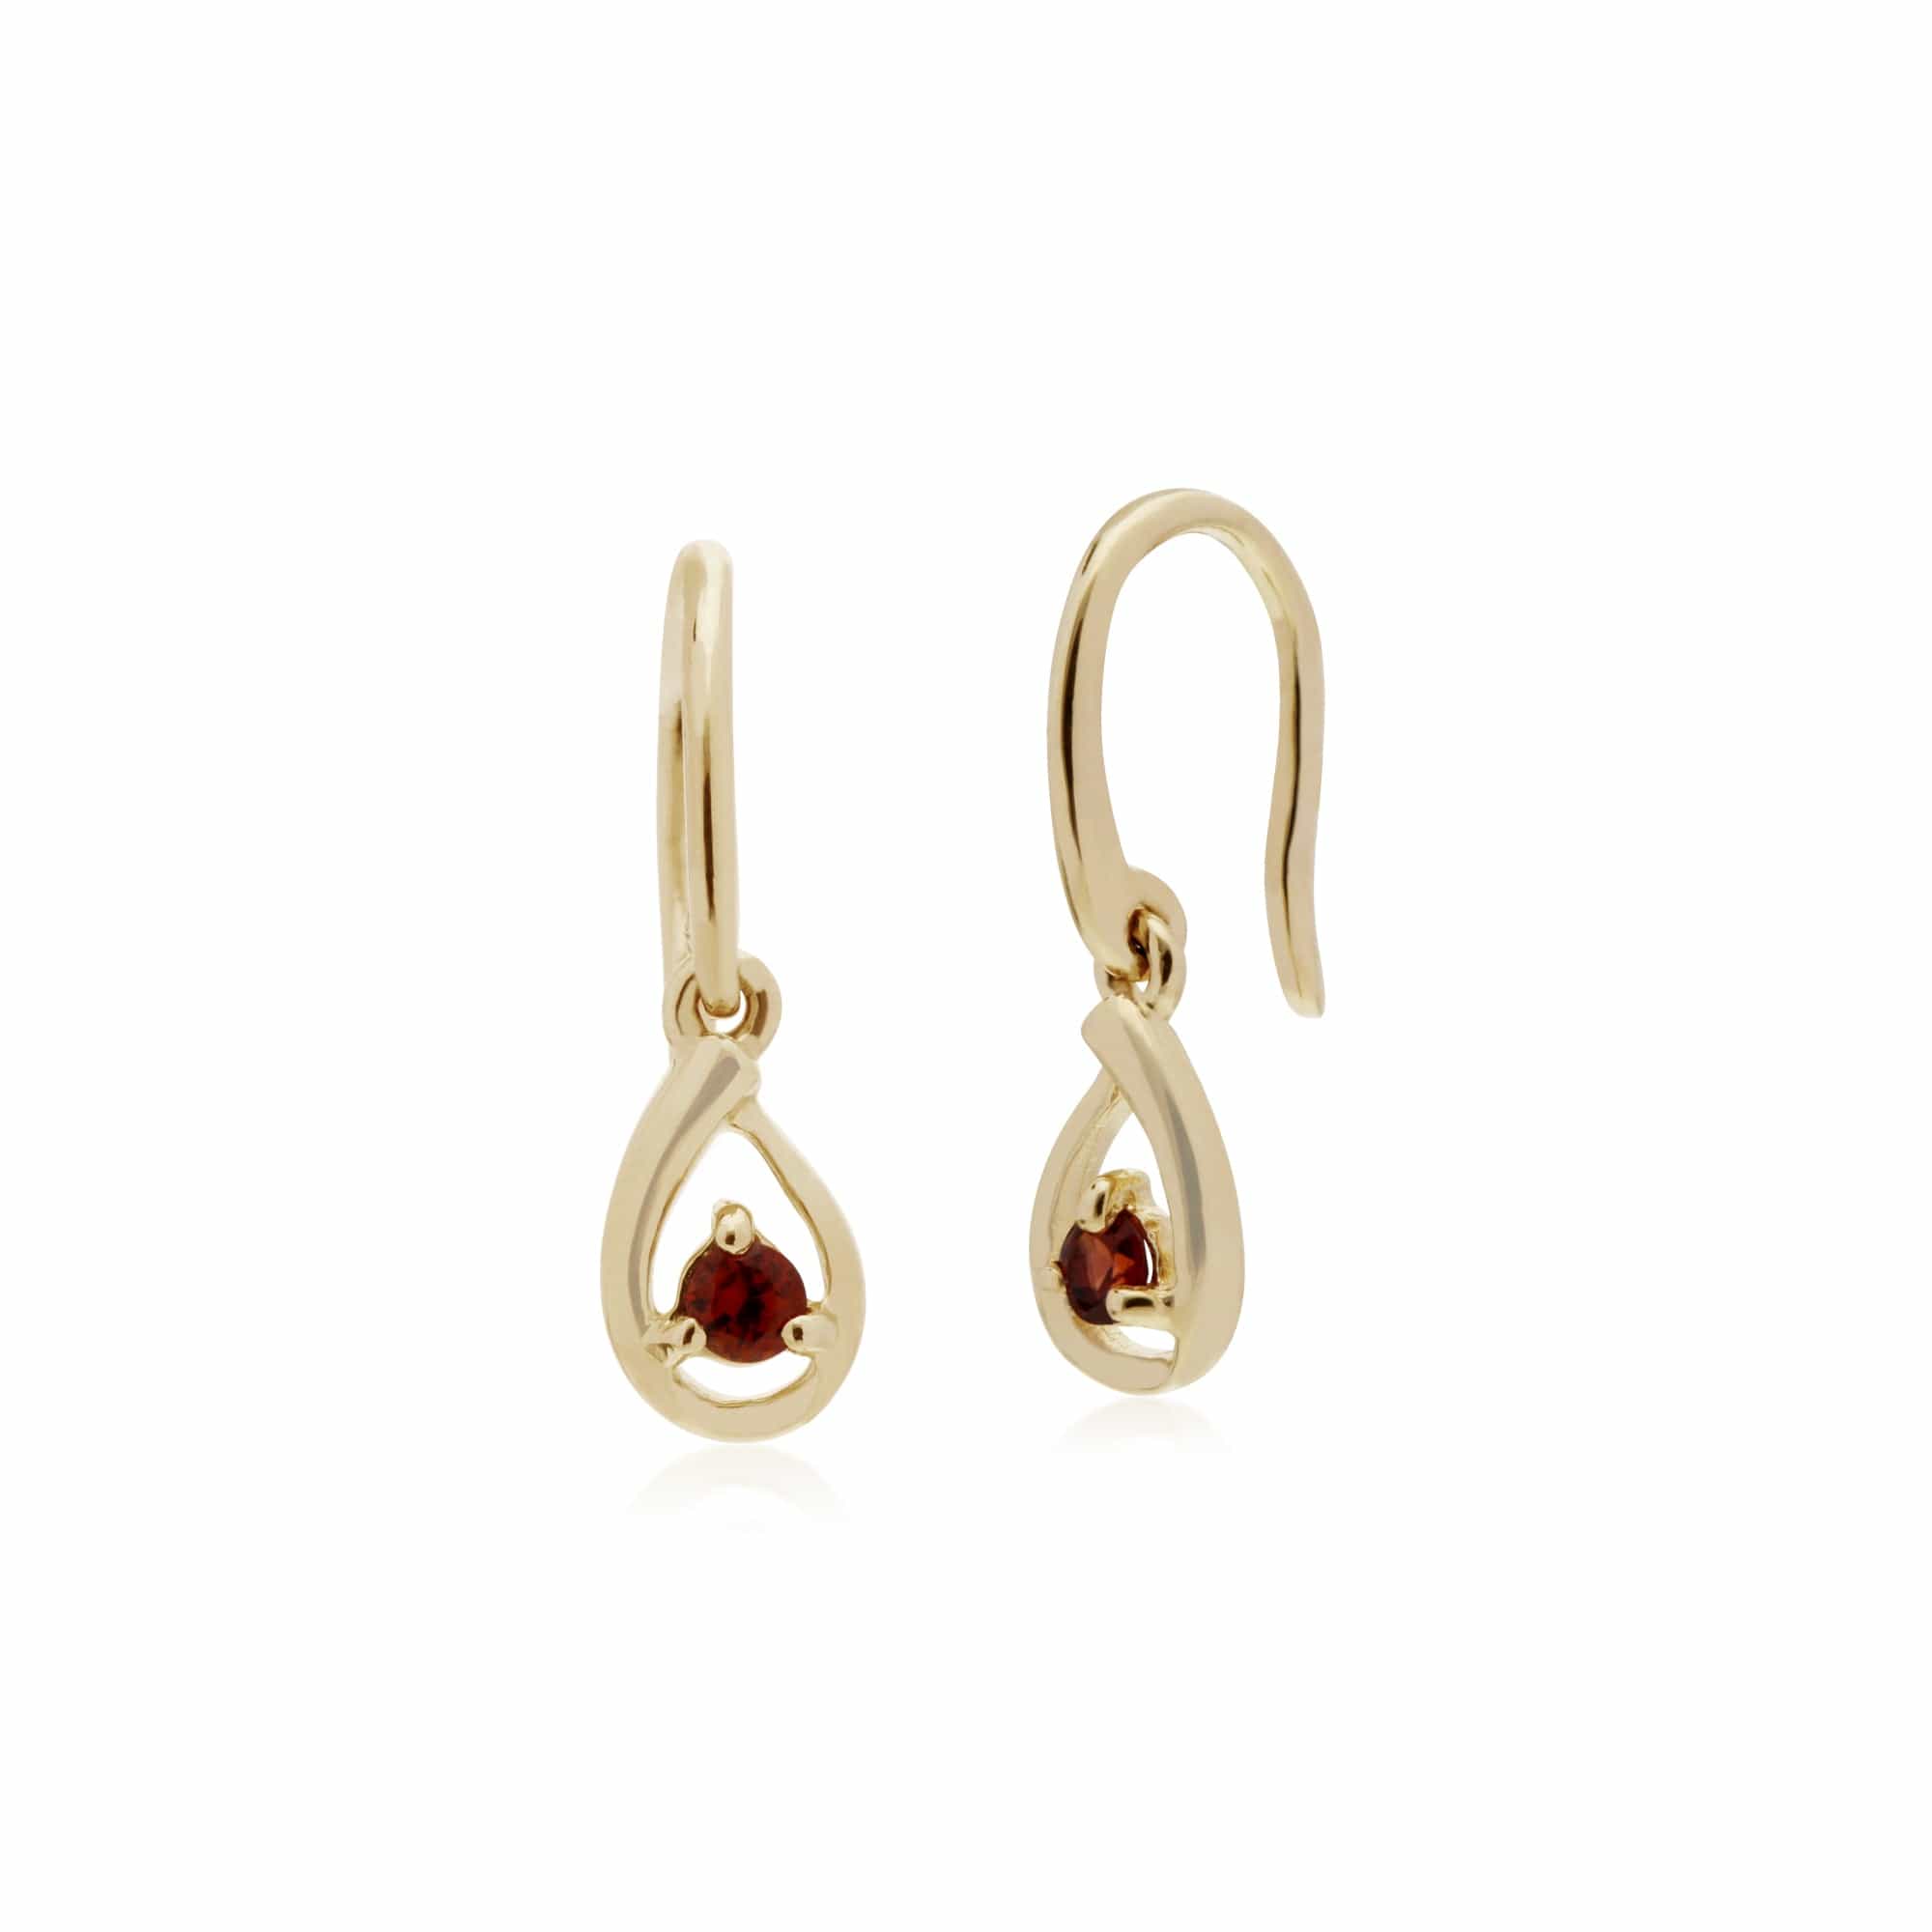 135E1190049-135P1551049 Classic Round Garnet Single Stone Tear Drop Earrings & Necklace Set in 9ct Yellow Gold 2